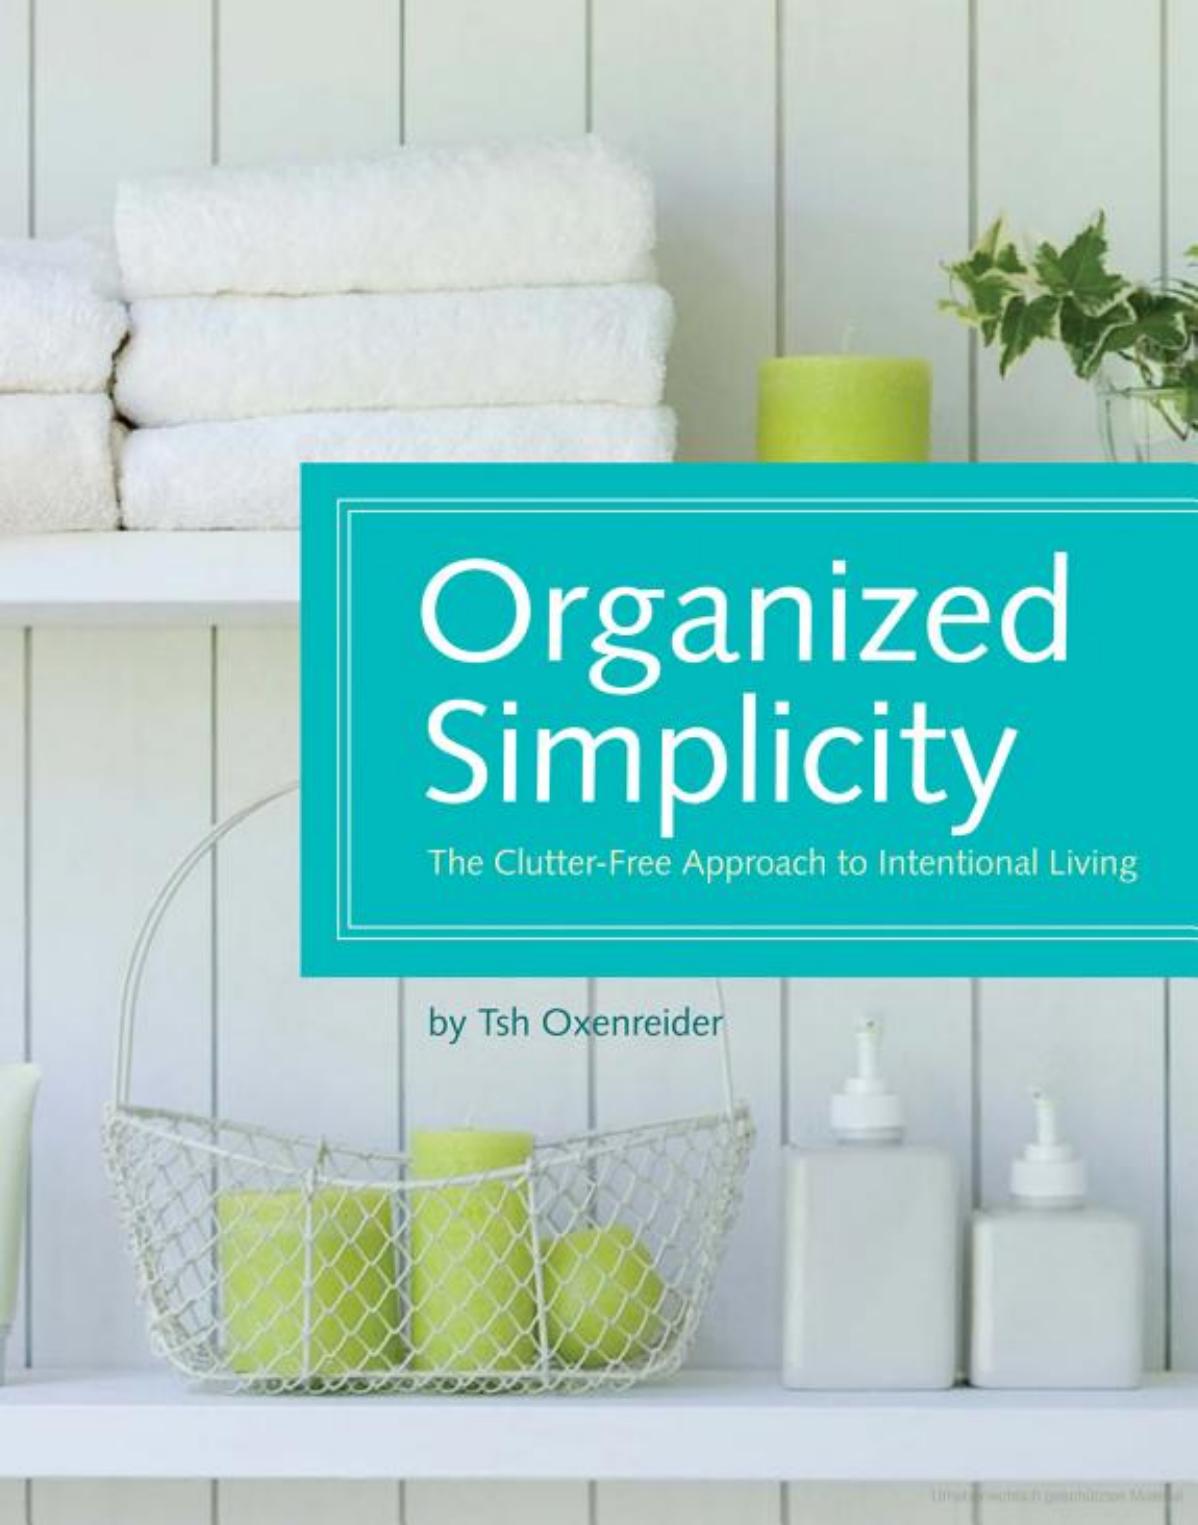 Organized Simplicity: The Clutter-Free Approach to Intentional Living by Tsh Oxenreider